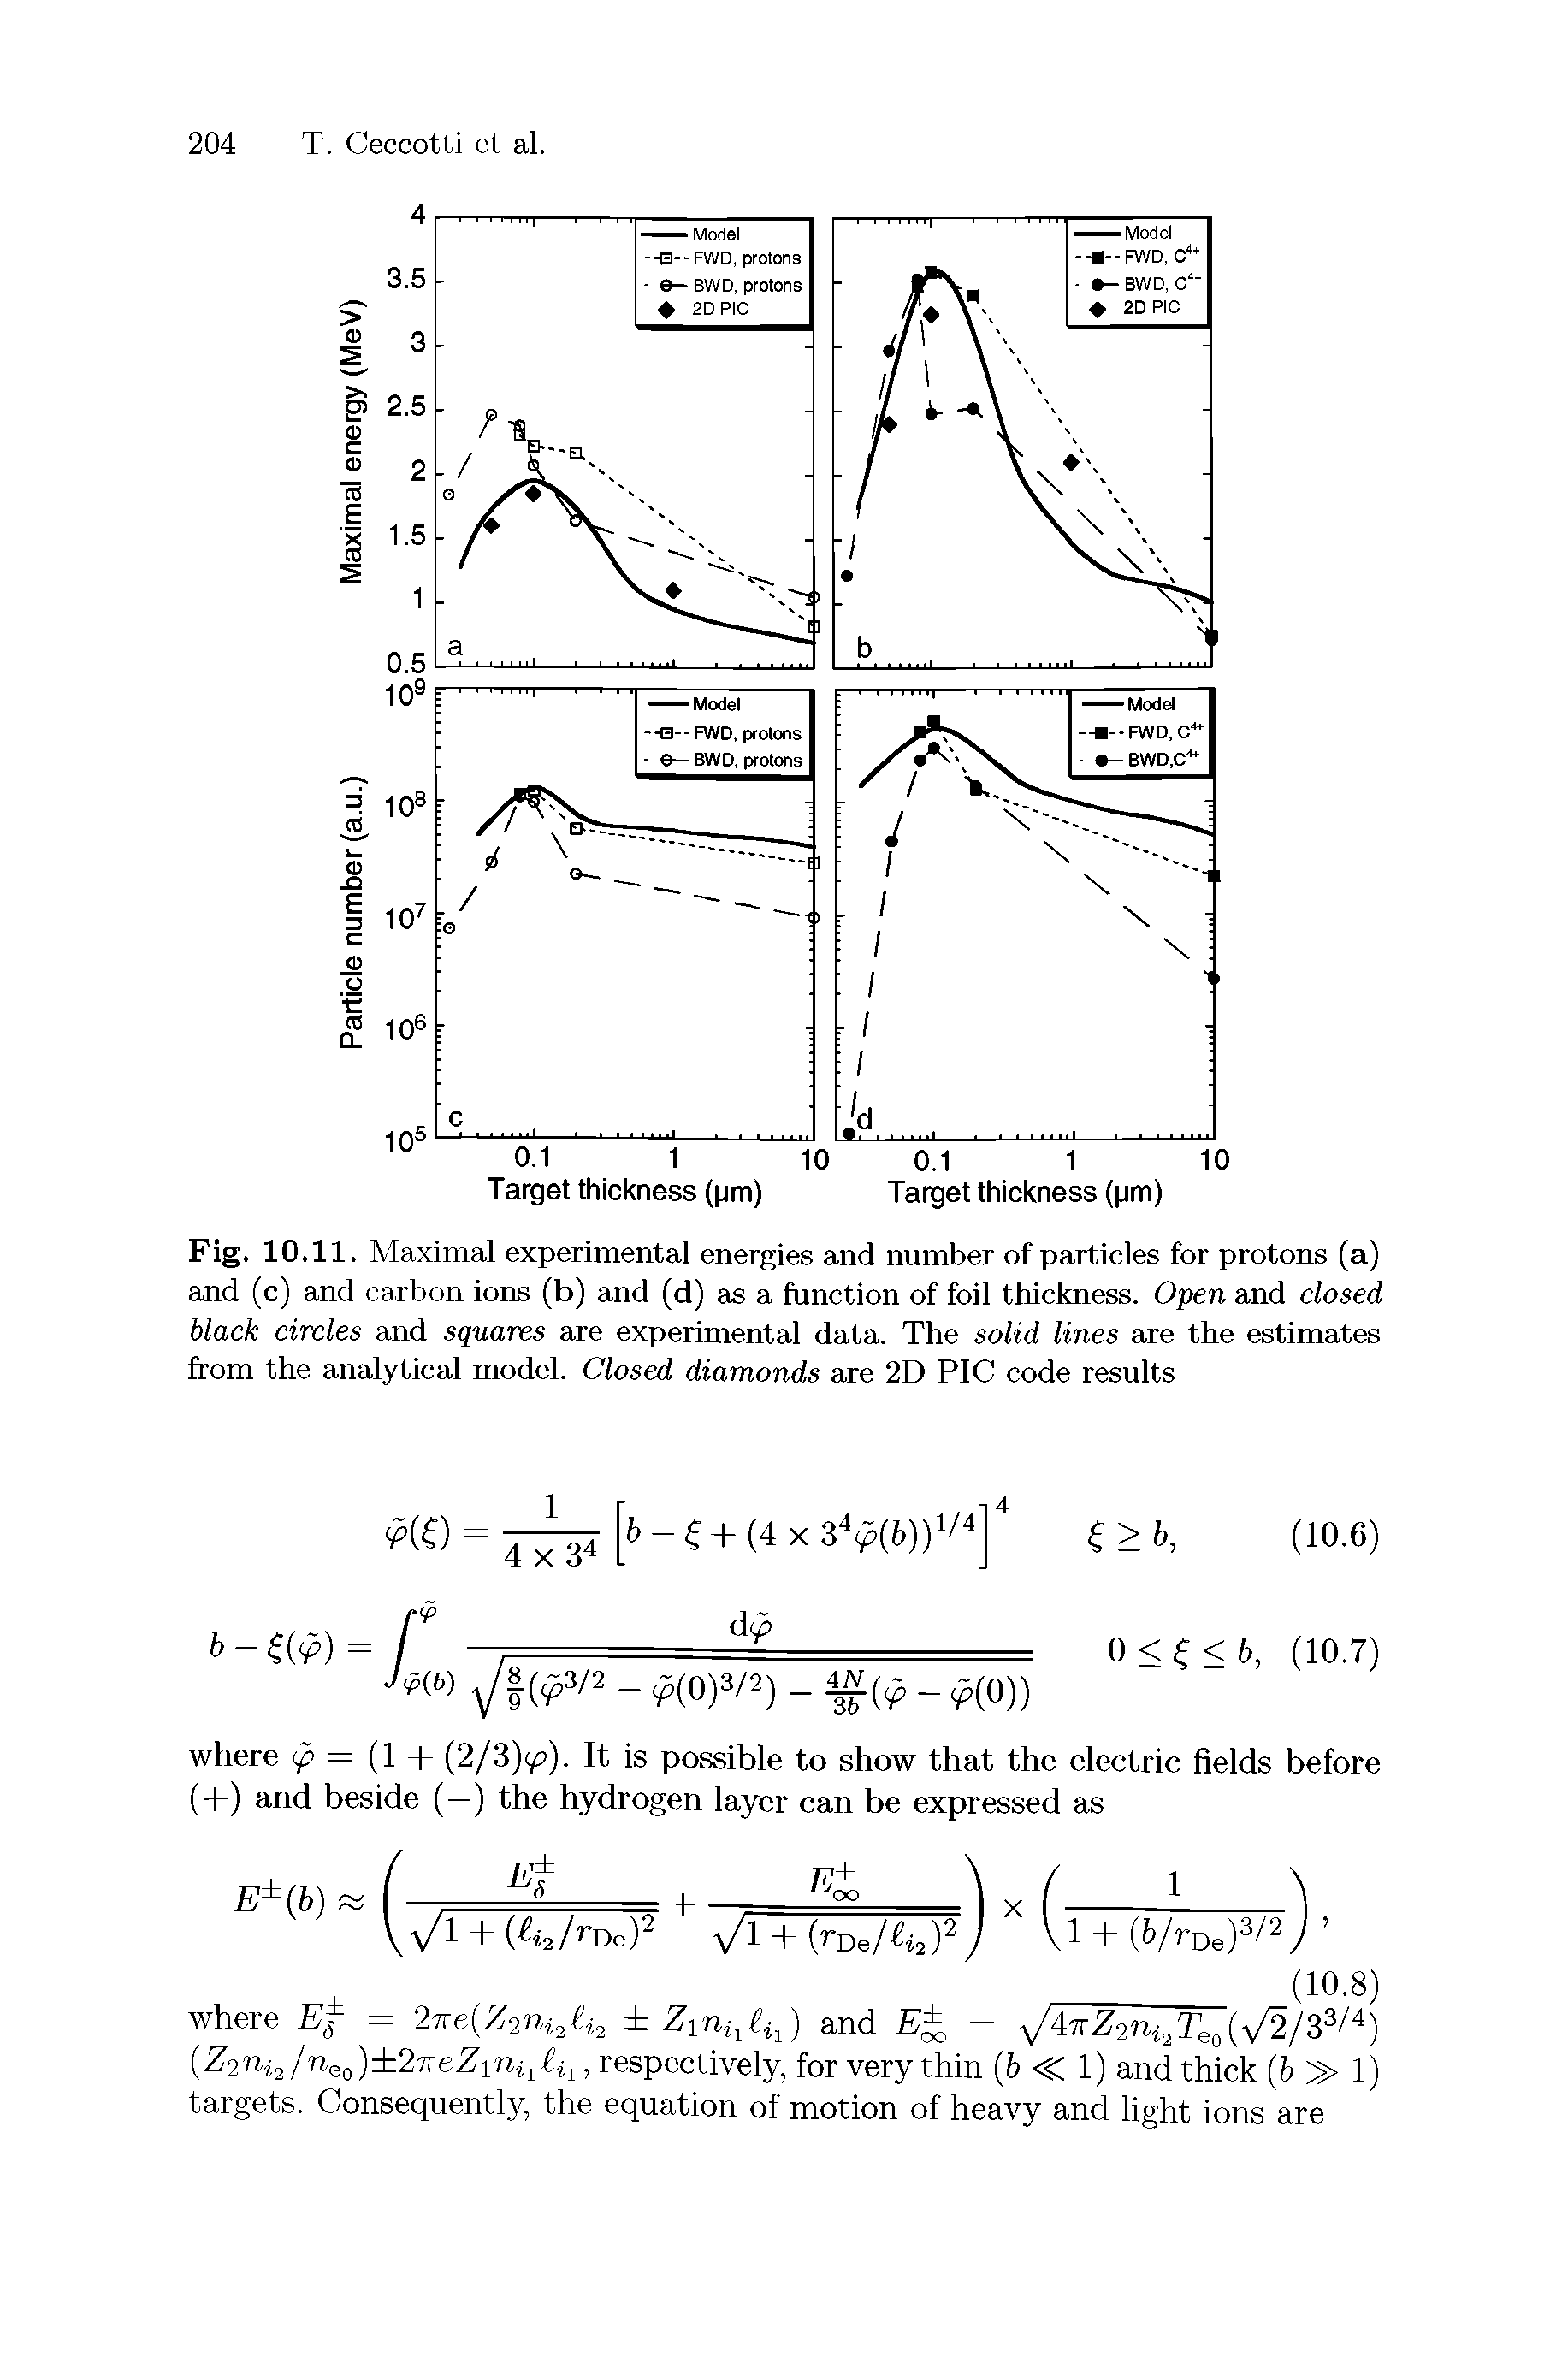 Fig. 10.11. Maximal experimental energies and number of particles for protons (a) and (c) and carbon ions (b) and (d) as a function of foil thickness. Open and closed black circles and squares are experimental data. The solid lines are the estimates from the analytical model. Closed diamonds are 2D PIC code results...